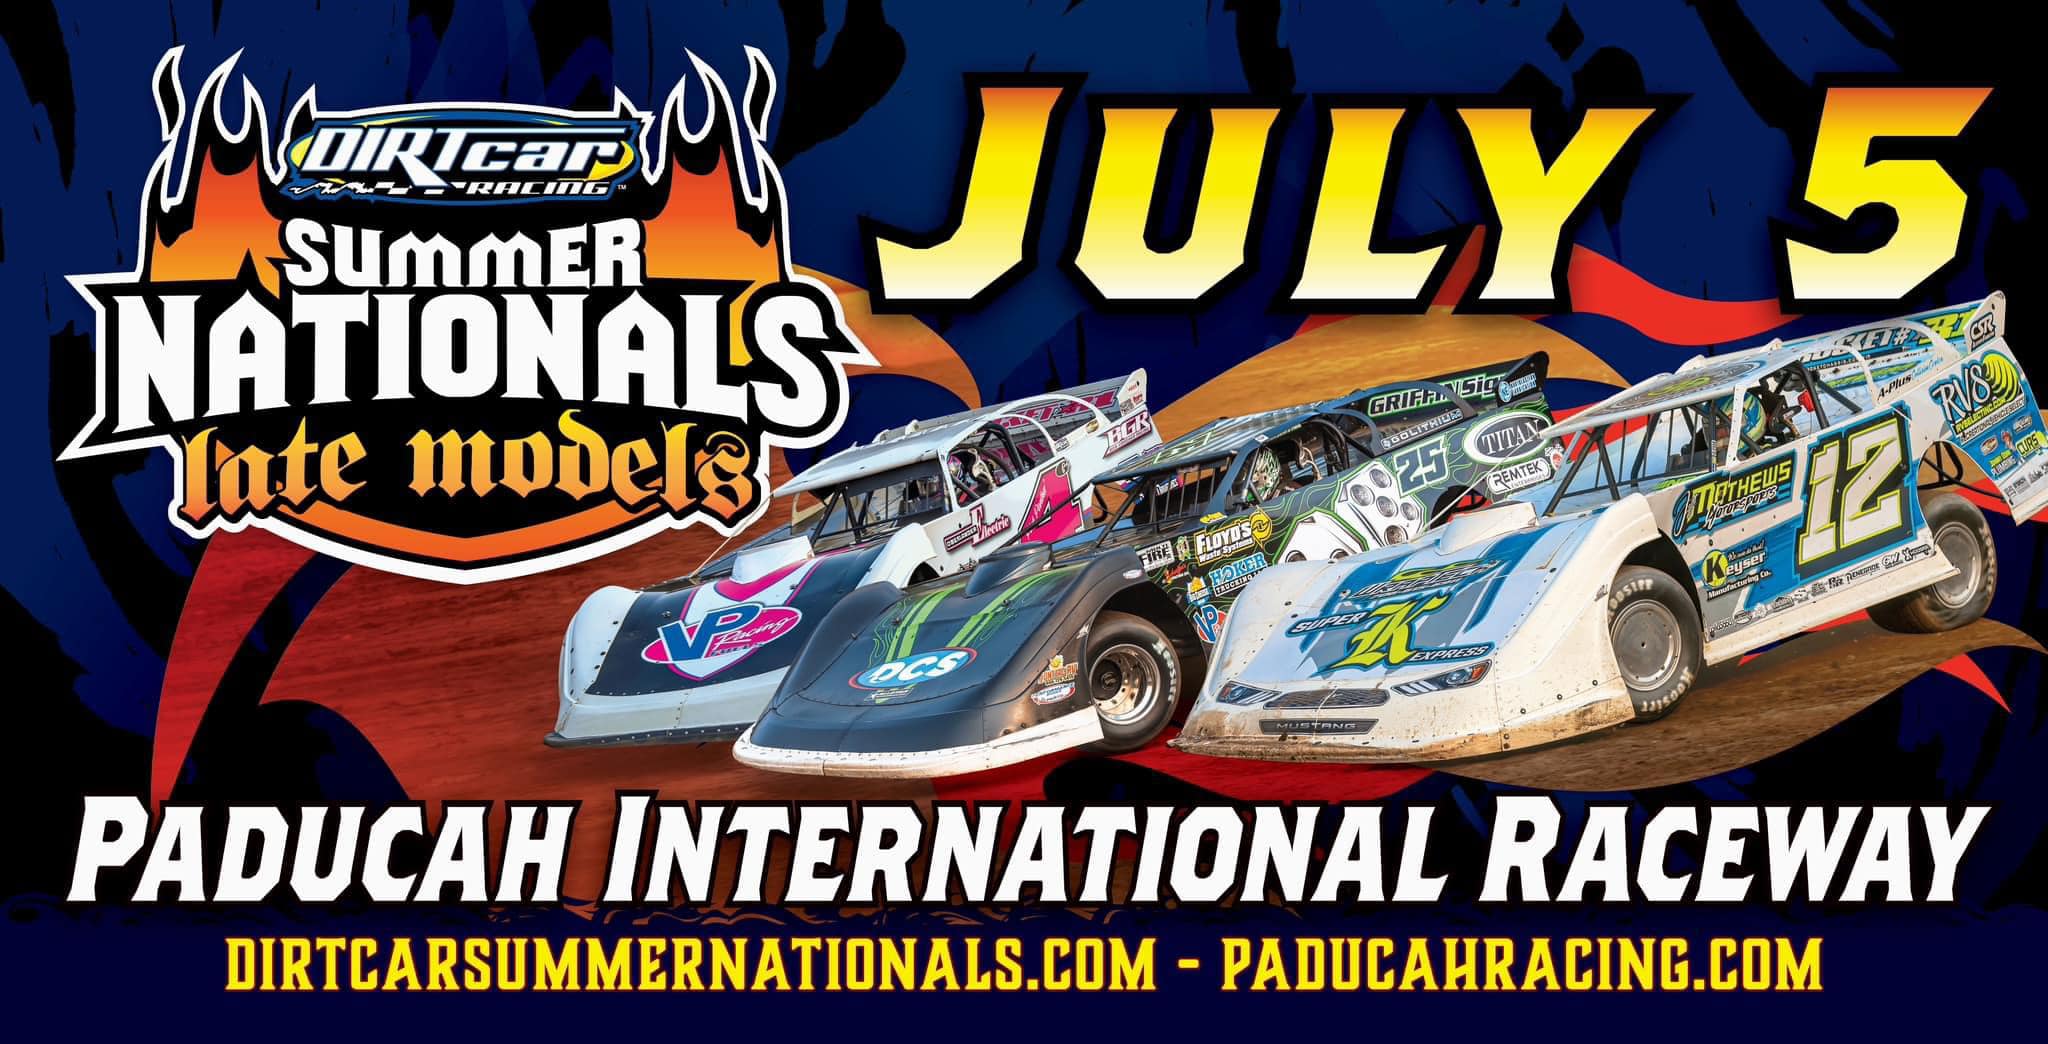 We’ve got two tickets we’re giving away for the Summer Nationals stop at Clarksv…